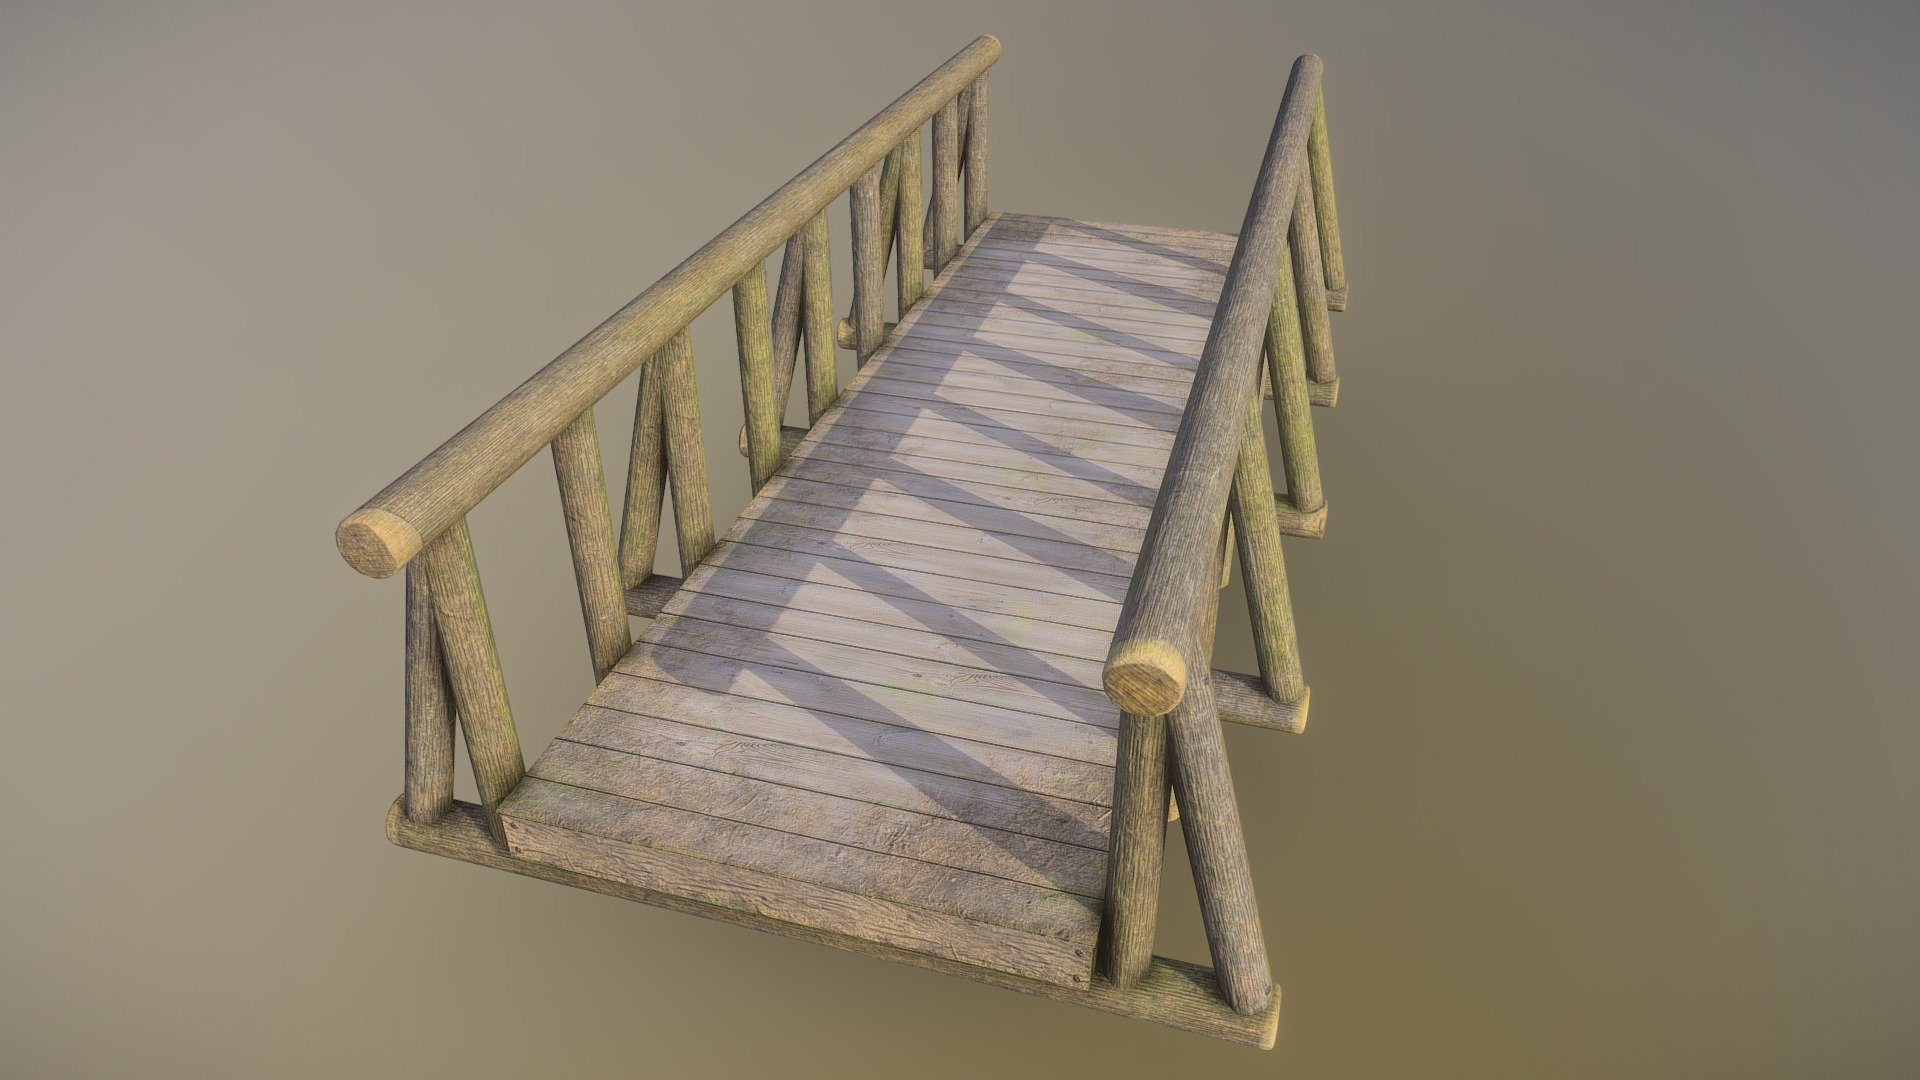 A wooden bridge I made for a current WIP nature scene in UE4. Modelled in Blender, textured in Substance Painter 3d model